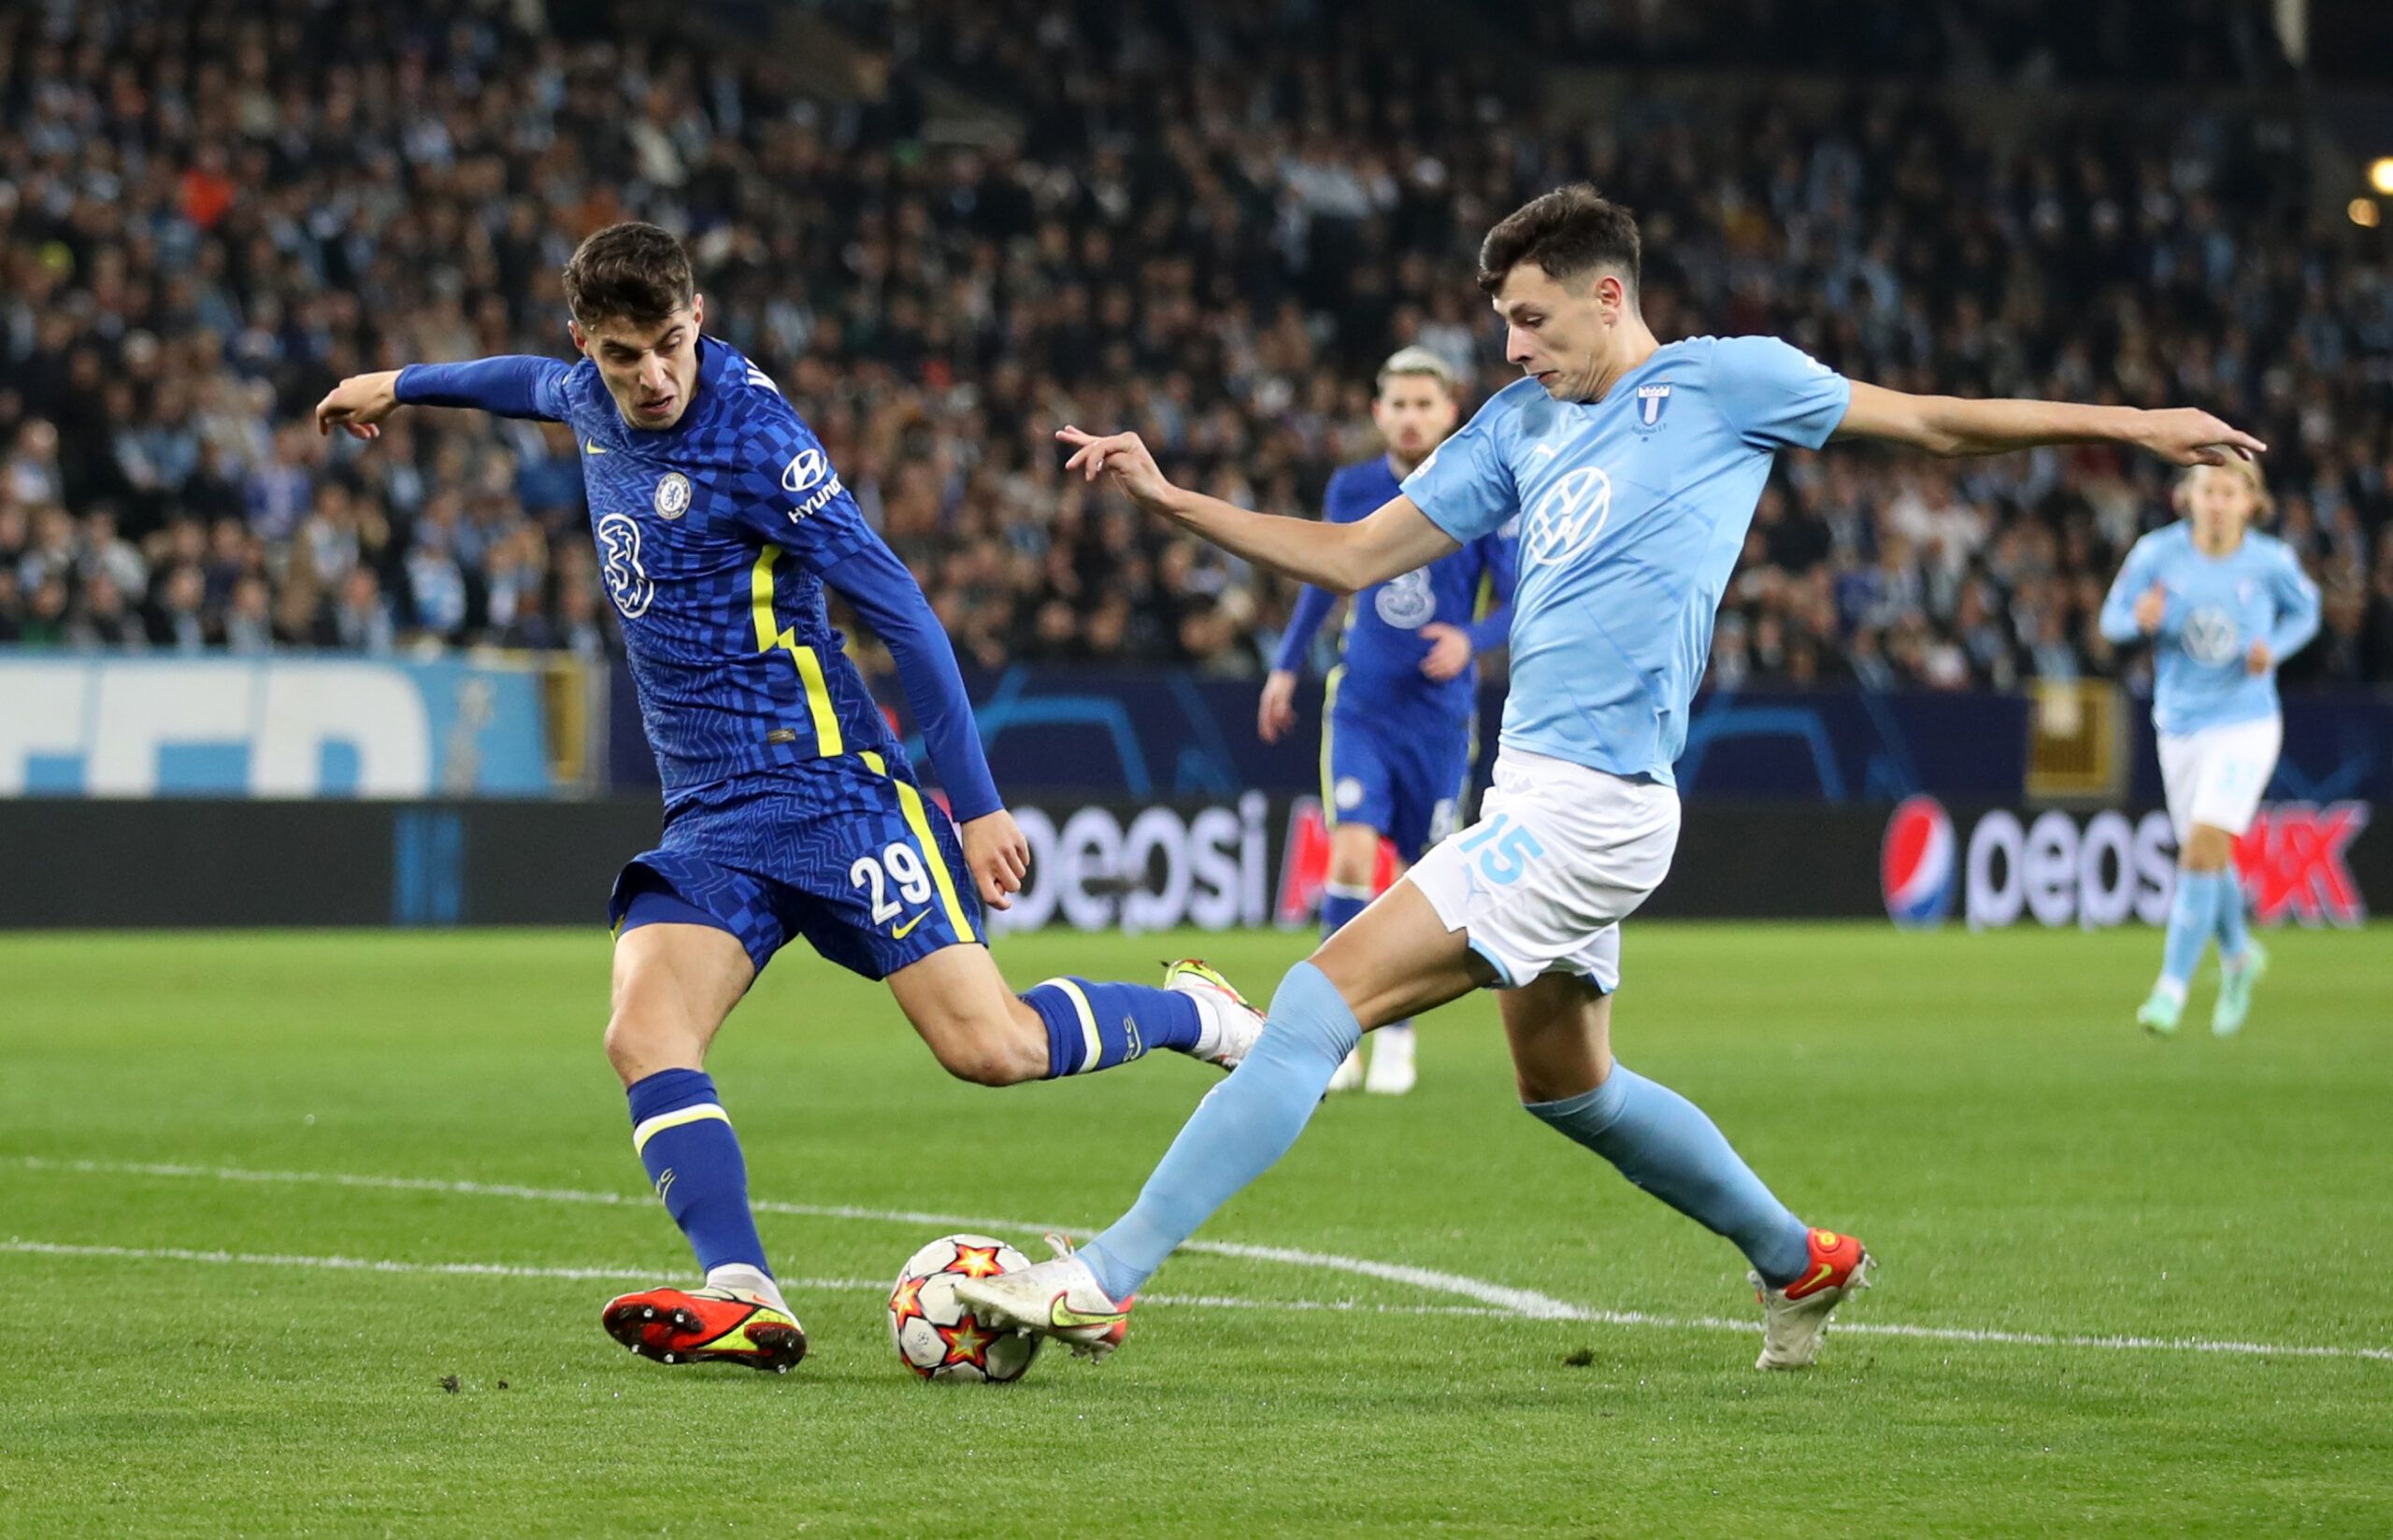 Soccer Football - Champions League - Group H - Malmo FF v Chelsea - Eleda Stadion, Malmo, Sweden - November 2, 2021 Chelsea's Kai Havertz in action with Malmo FF's Anel Ahmedhodzic Action Images via Reuters/Carl Recine